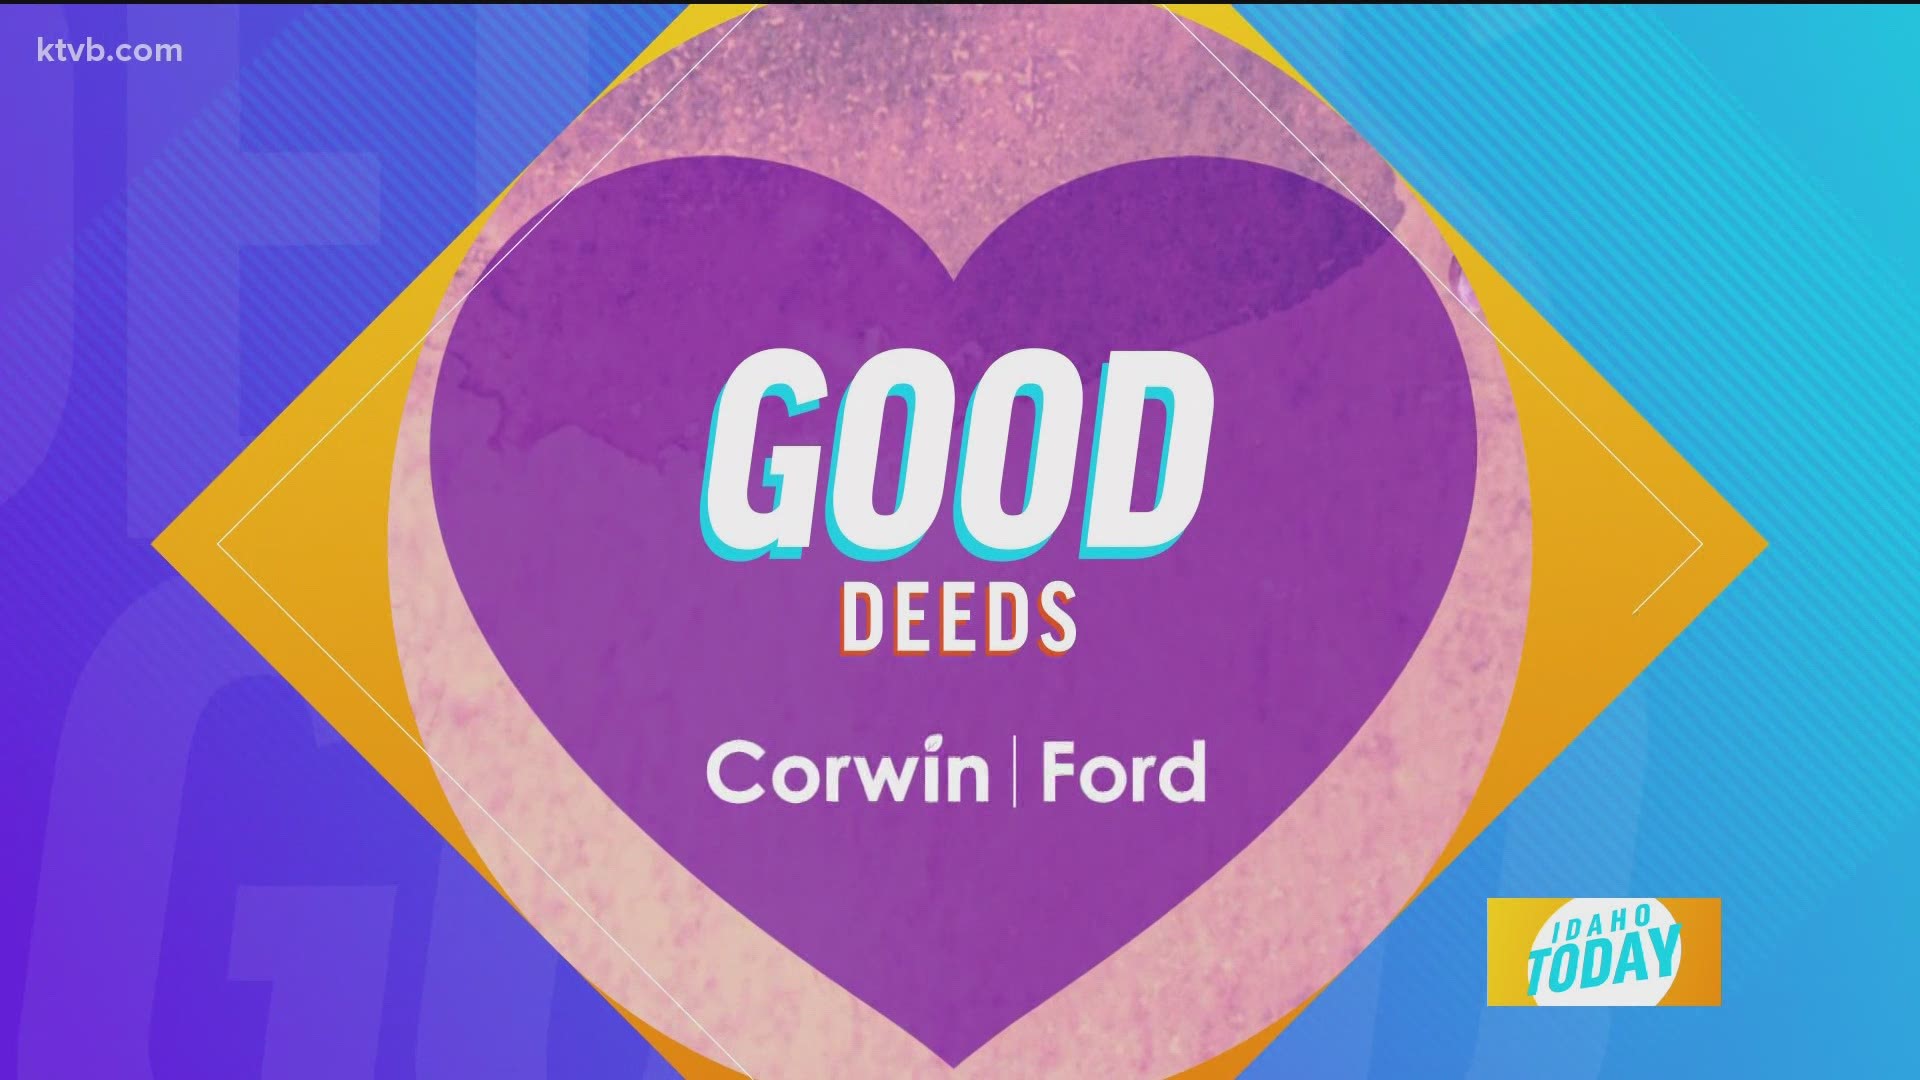 Today in Corwin Ford's Good Deeds, the Women's & Children's Alliance shares with us what they do and how they benefit the Treasure Valley. Visit www.wcaboise.org.